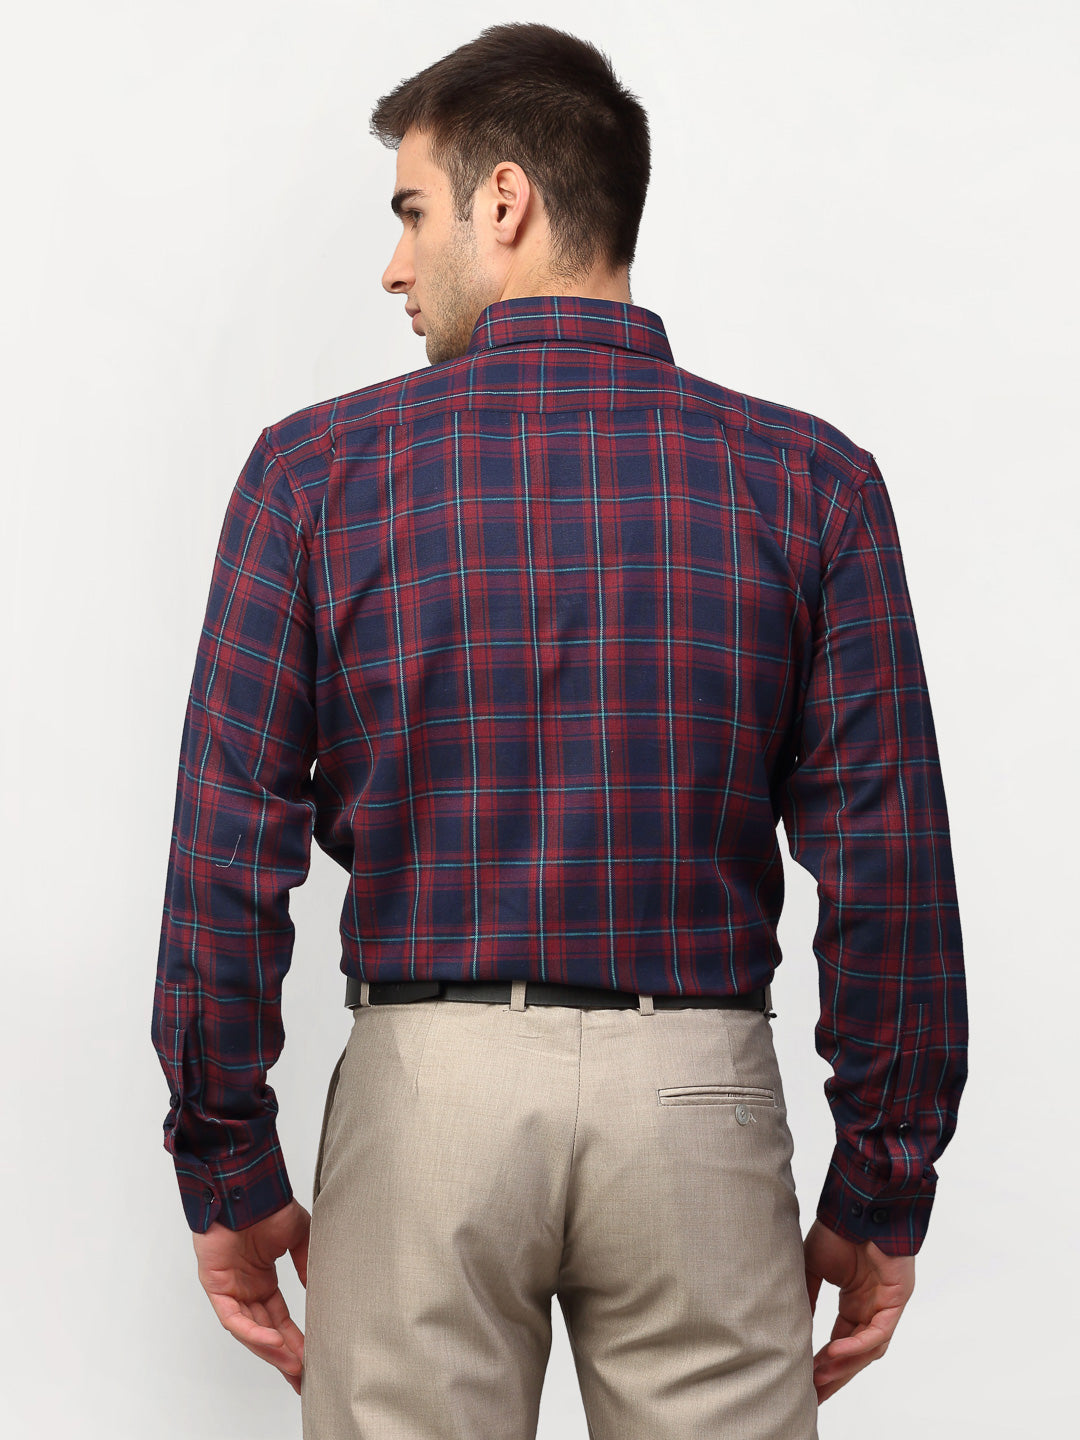 Men's Red Checked Formal Shirts ( SF 781Red-Blue ) - Jainish